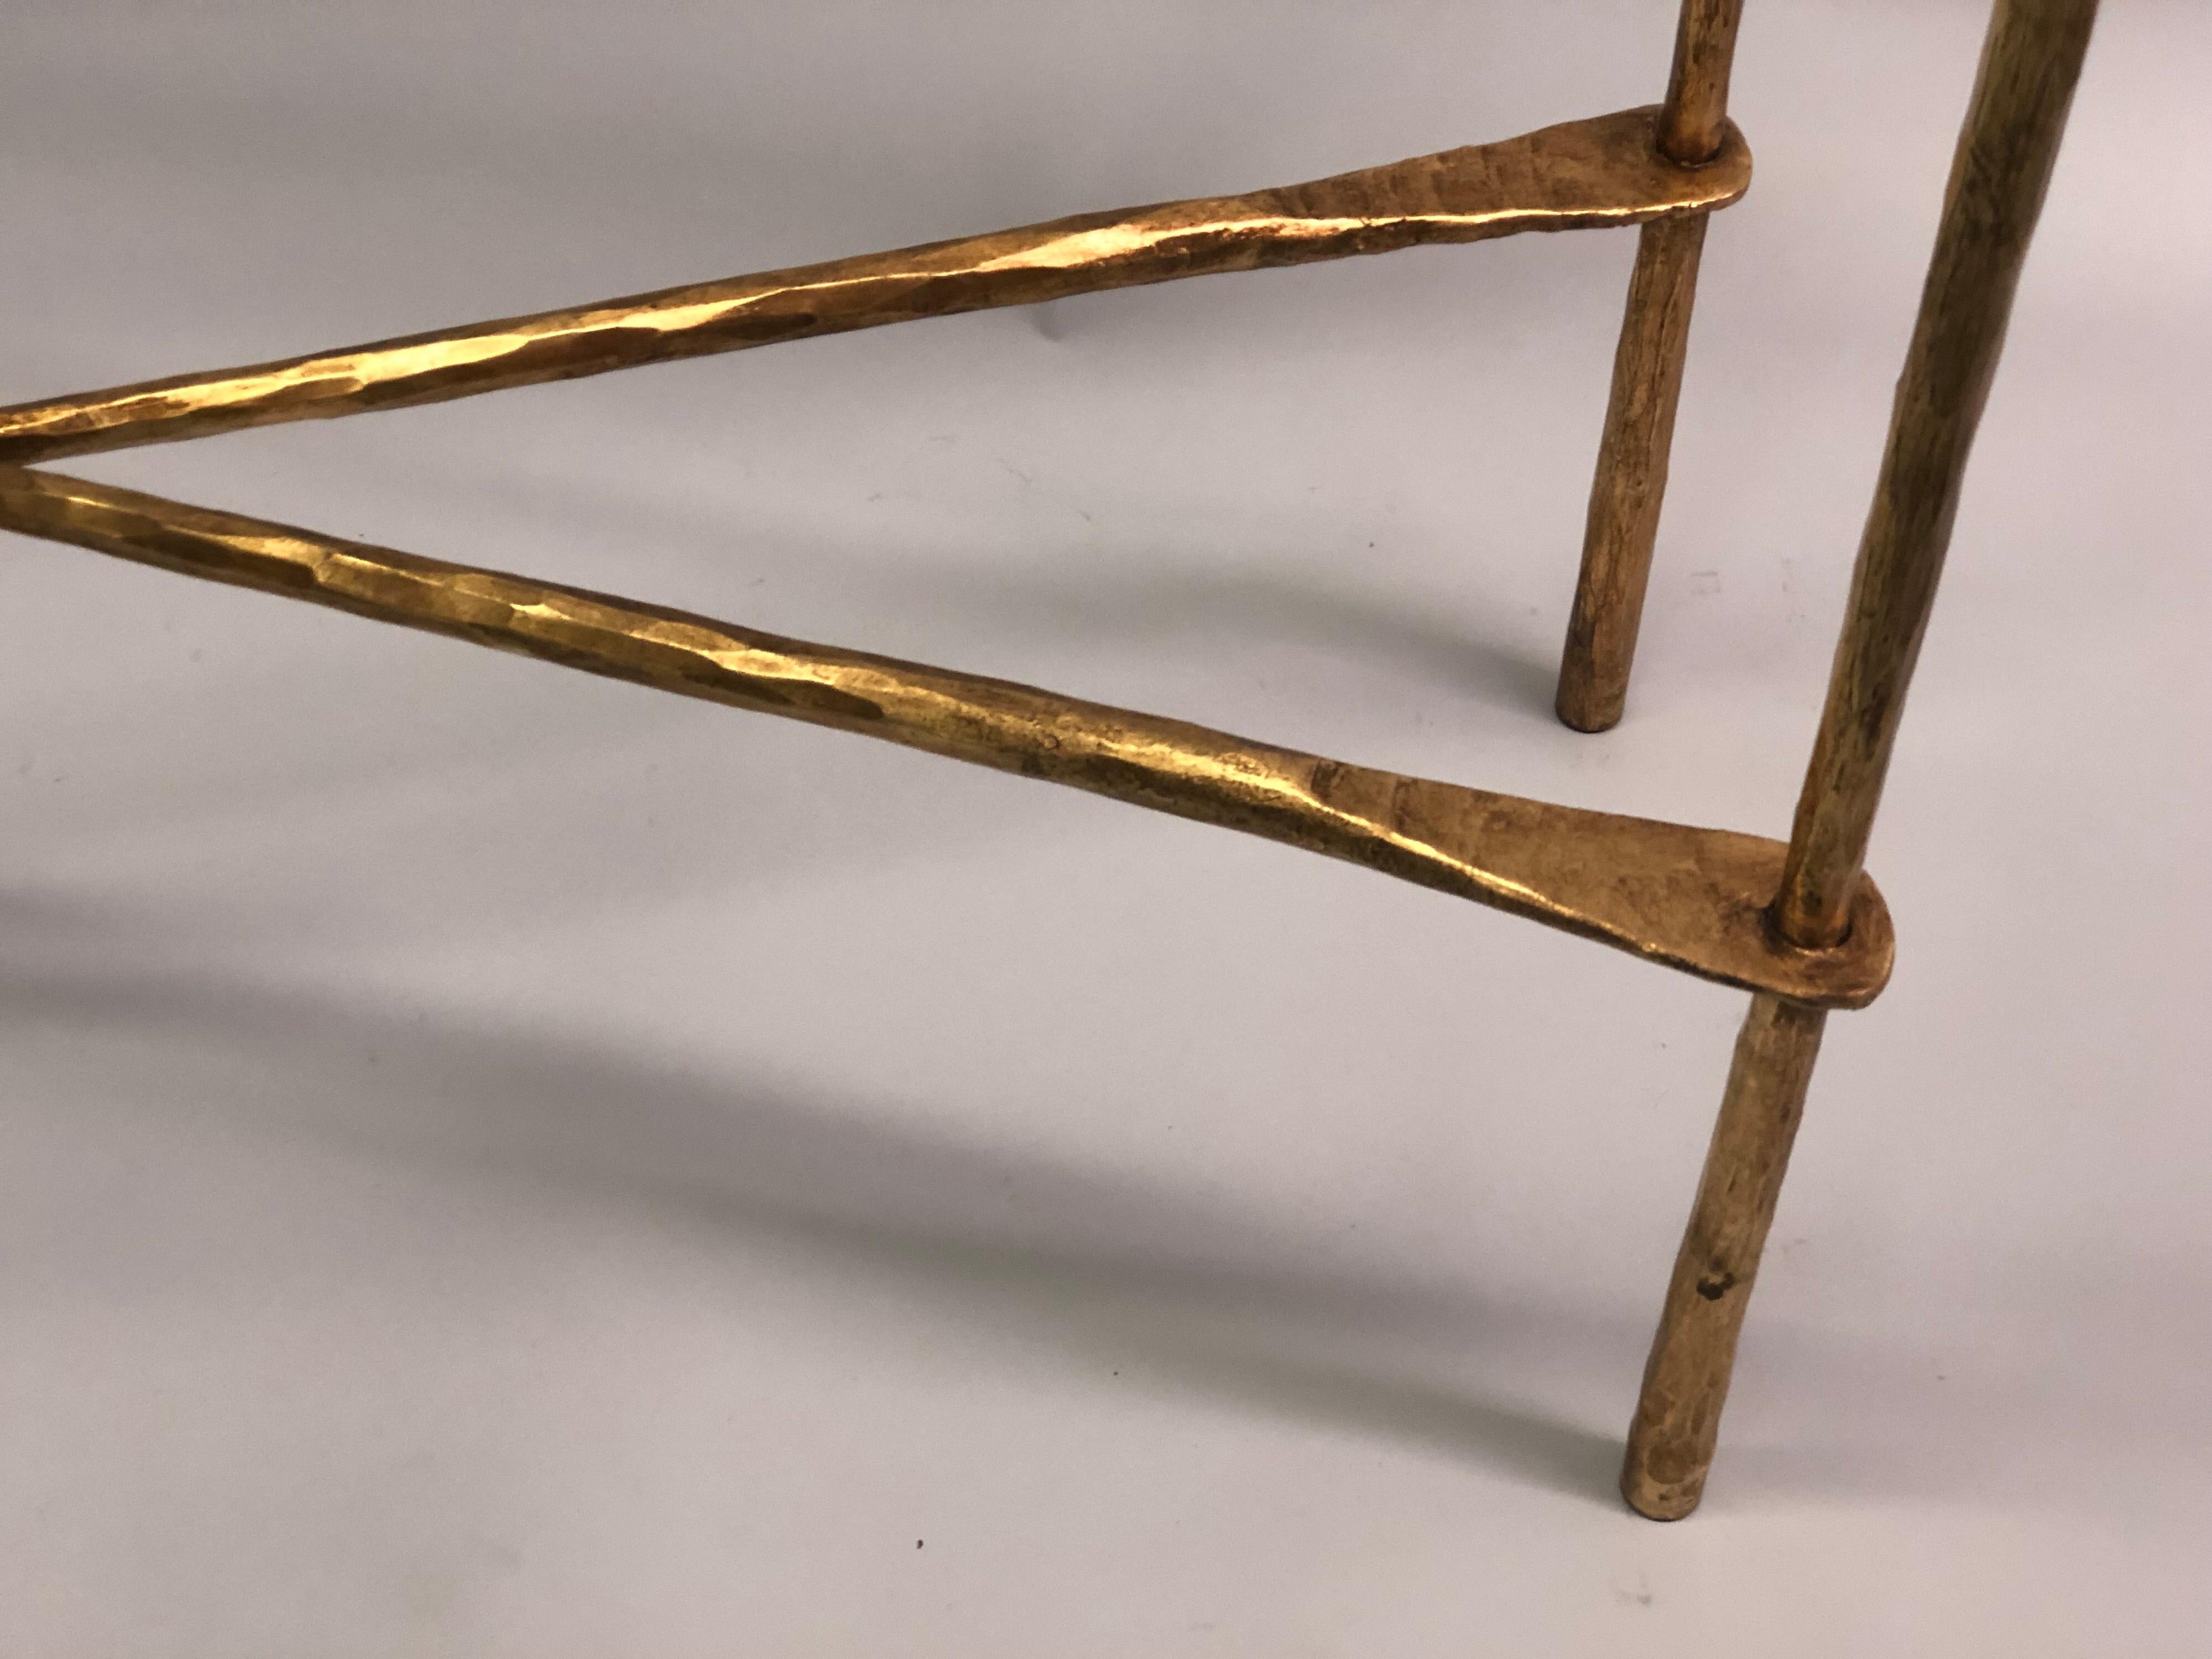 2 Italian Midcentury Hammered Iron & Gilt Consoles by Giovanni Banci for Hermes In Good Condition For Sale In New York, NY